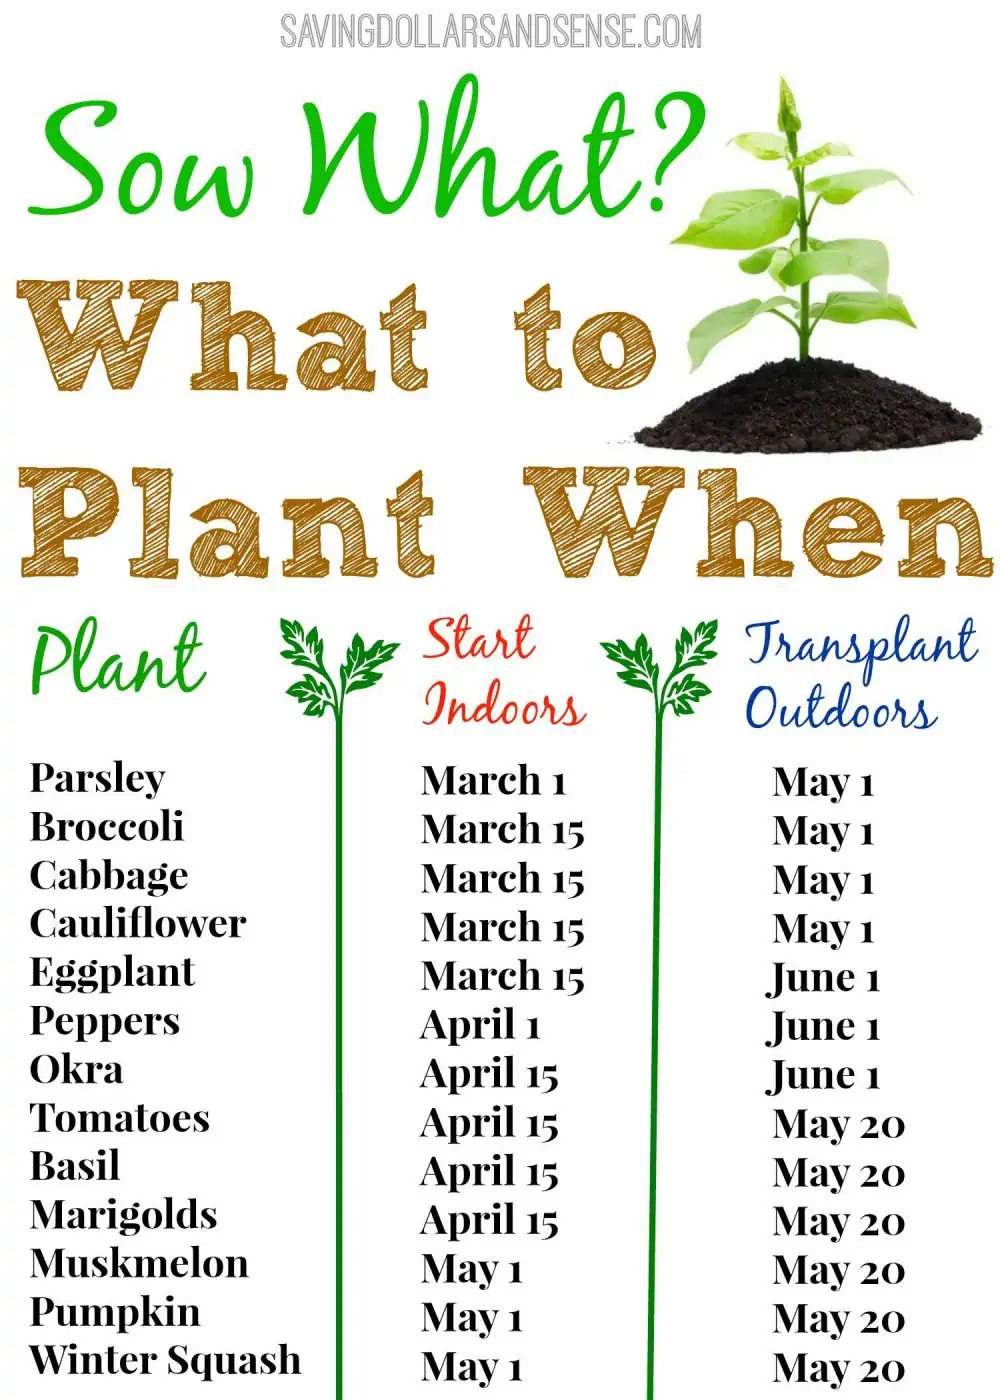 What to plant and when. A monthly overview for successful gardening.